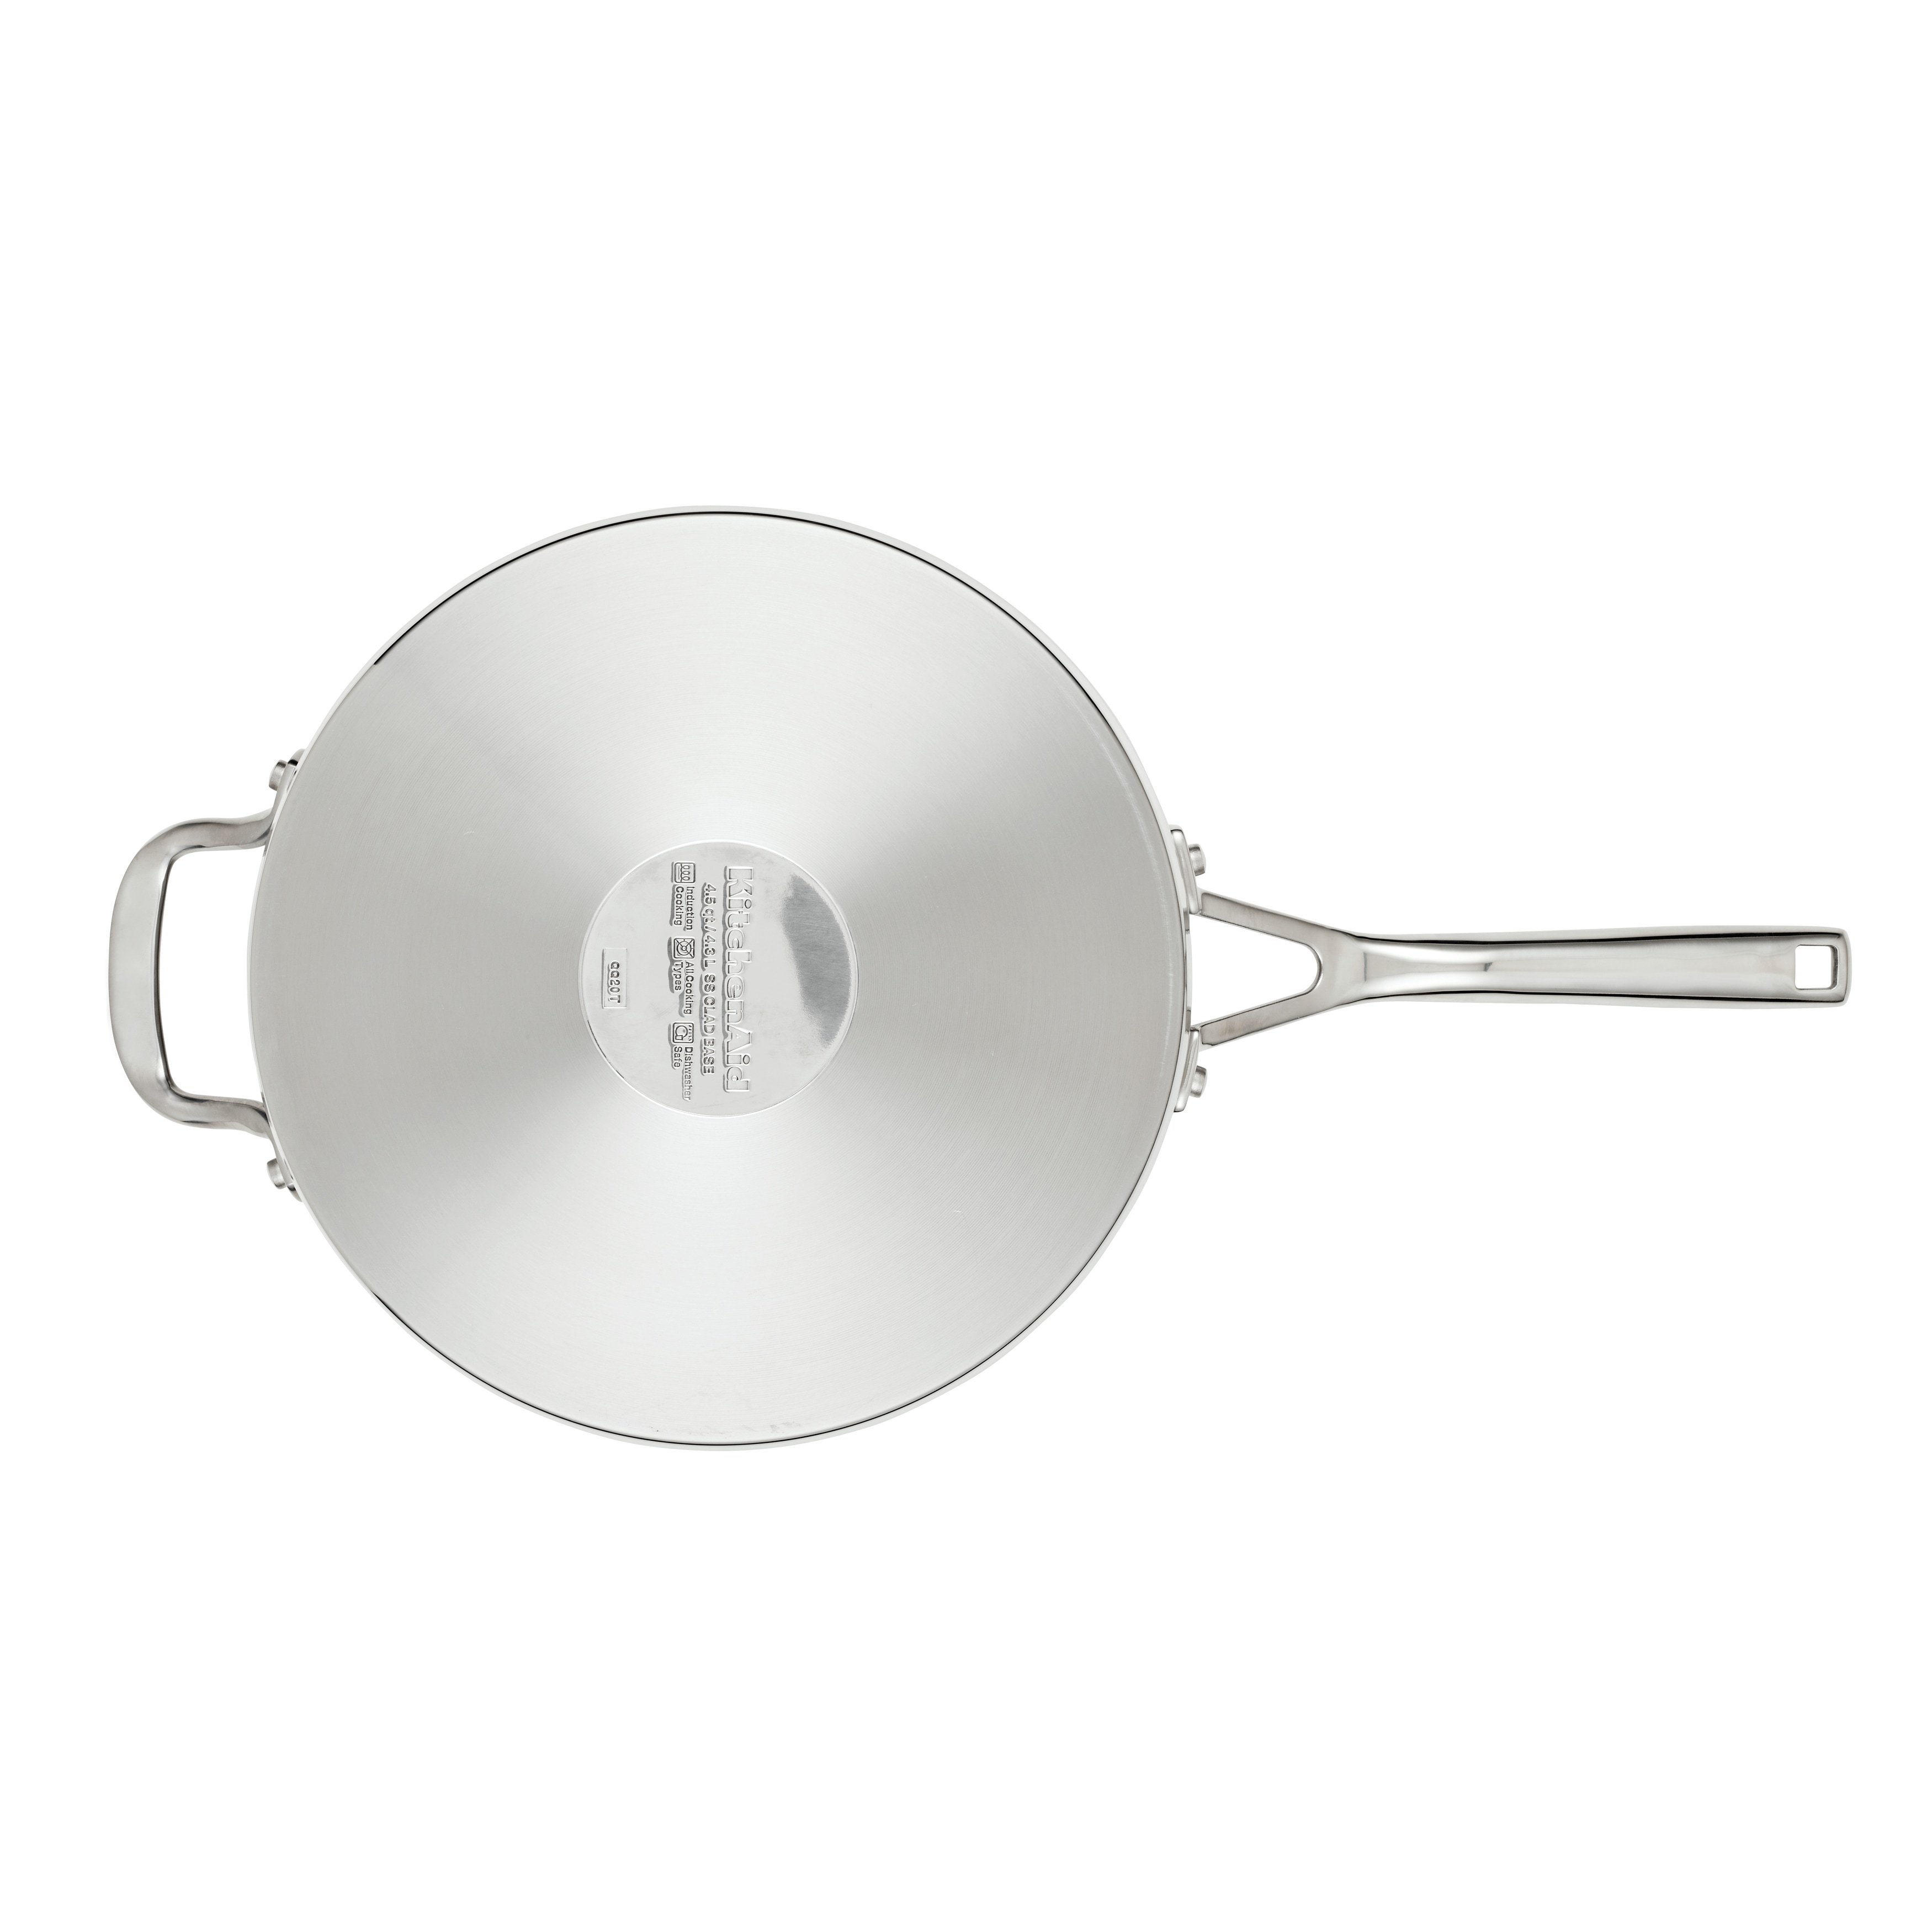 https://ak1.ostkcdn.com/images/products/is/images/direct/895c3cac606665a5849ab0abffa4d18e7d59145b/KitchenAid-3-Ply-Base-Stainless-Steel-Deep-Saute-Pan-with-Lid%2C-4.5qt.jpg